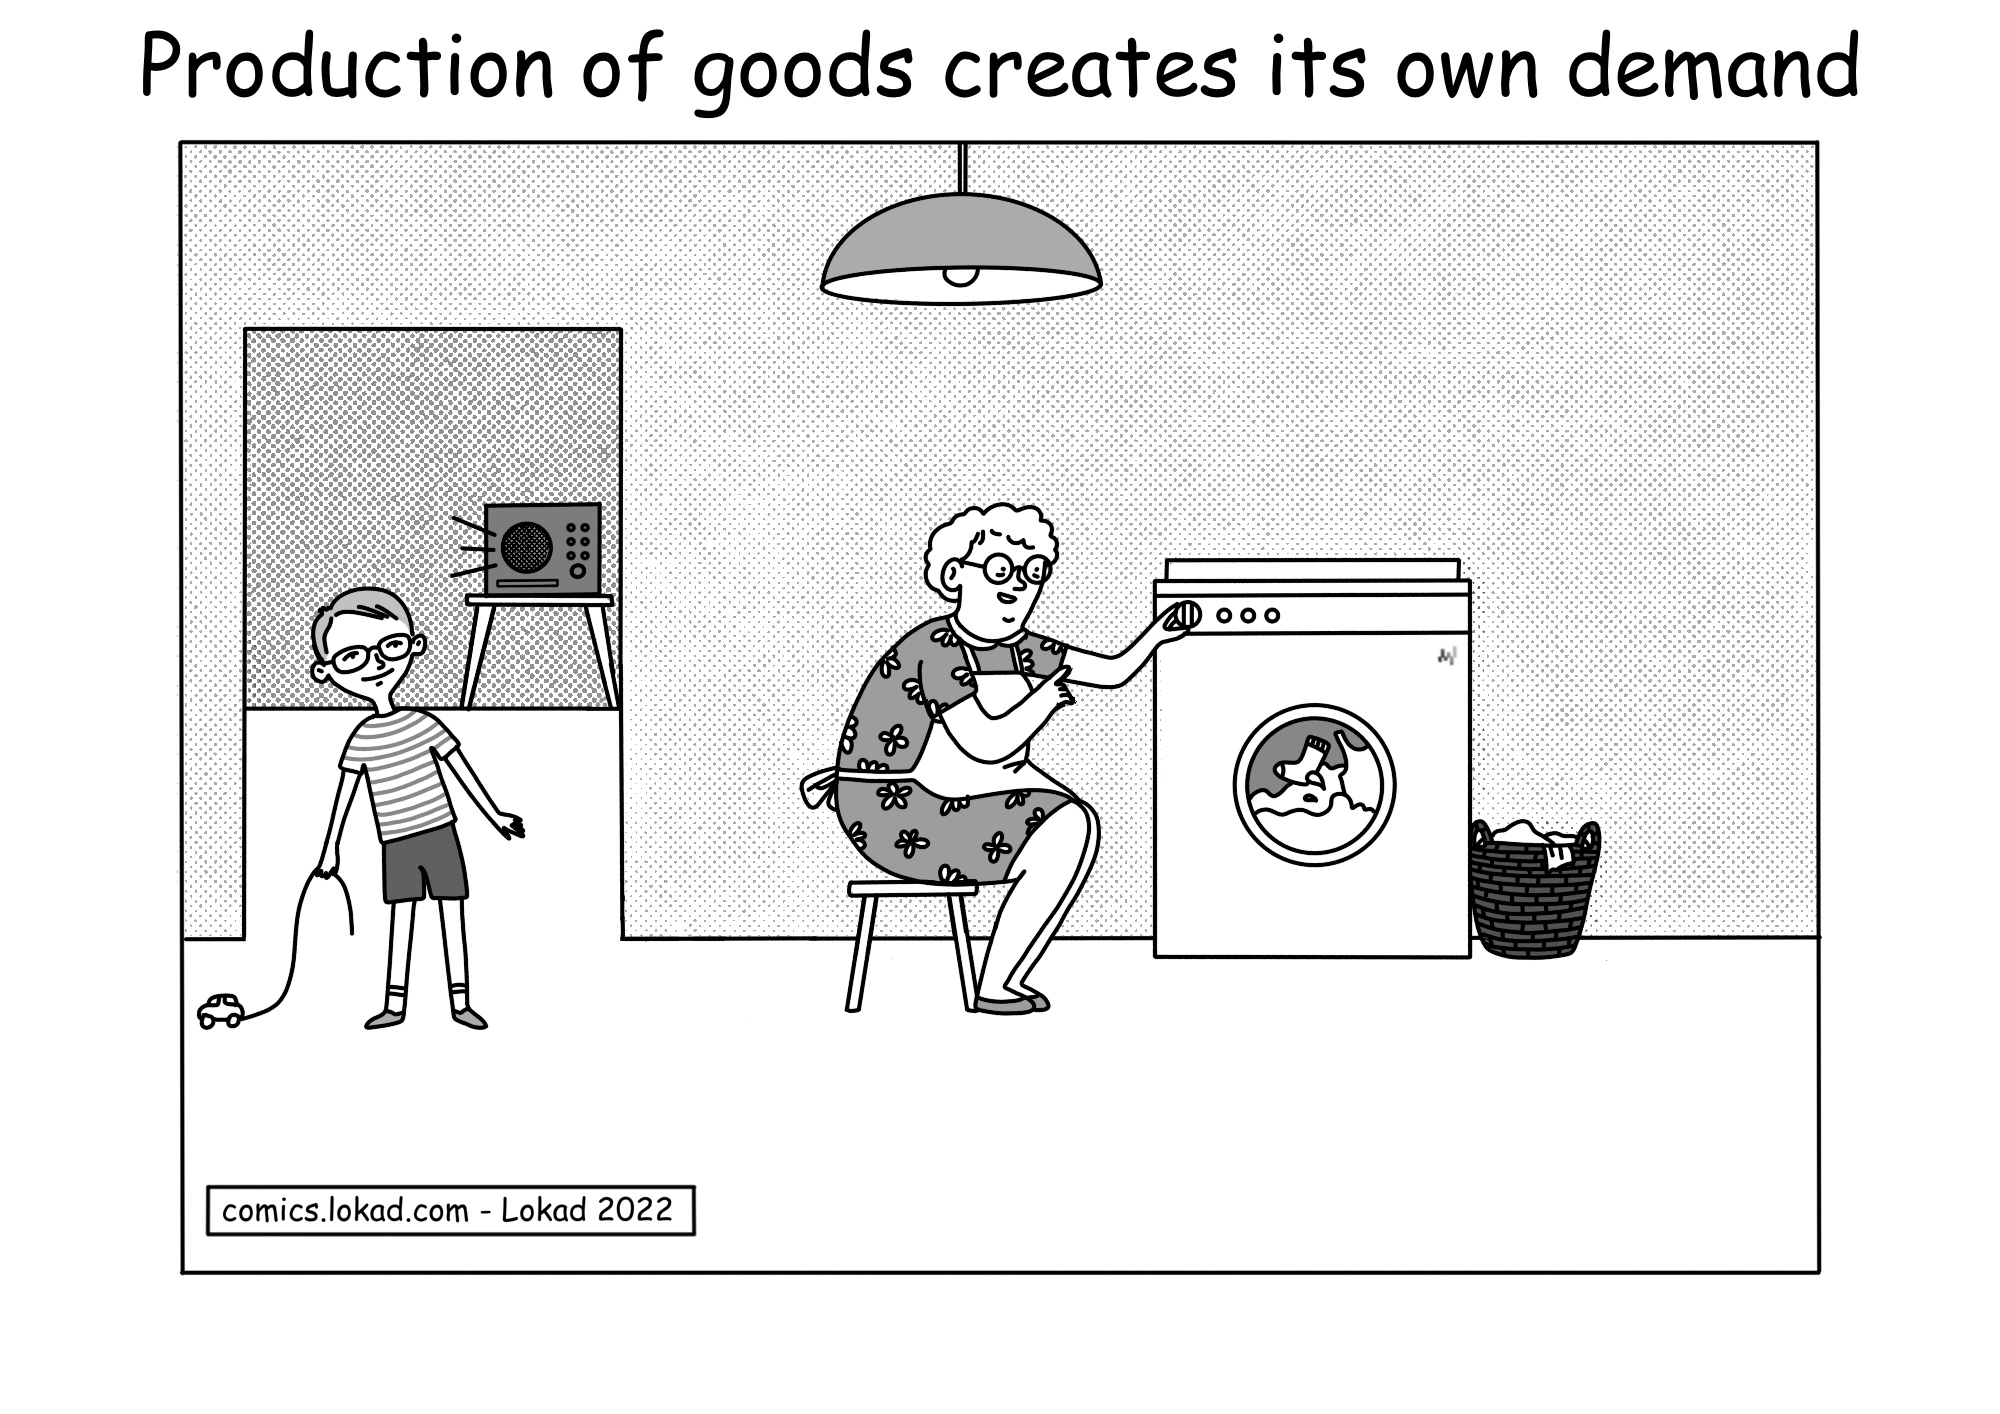 Production of goods creates its own demand